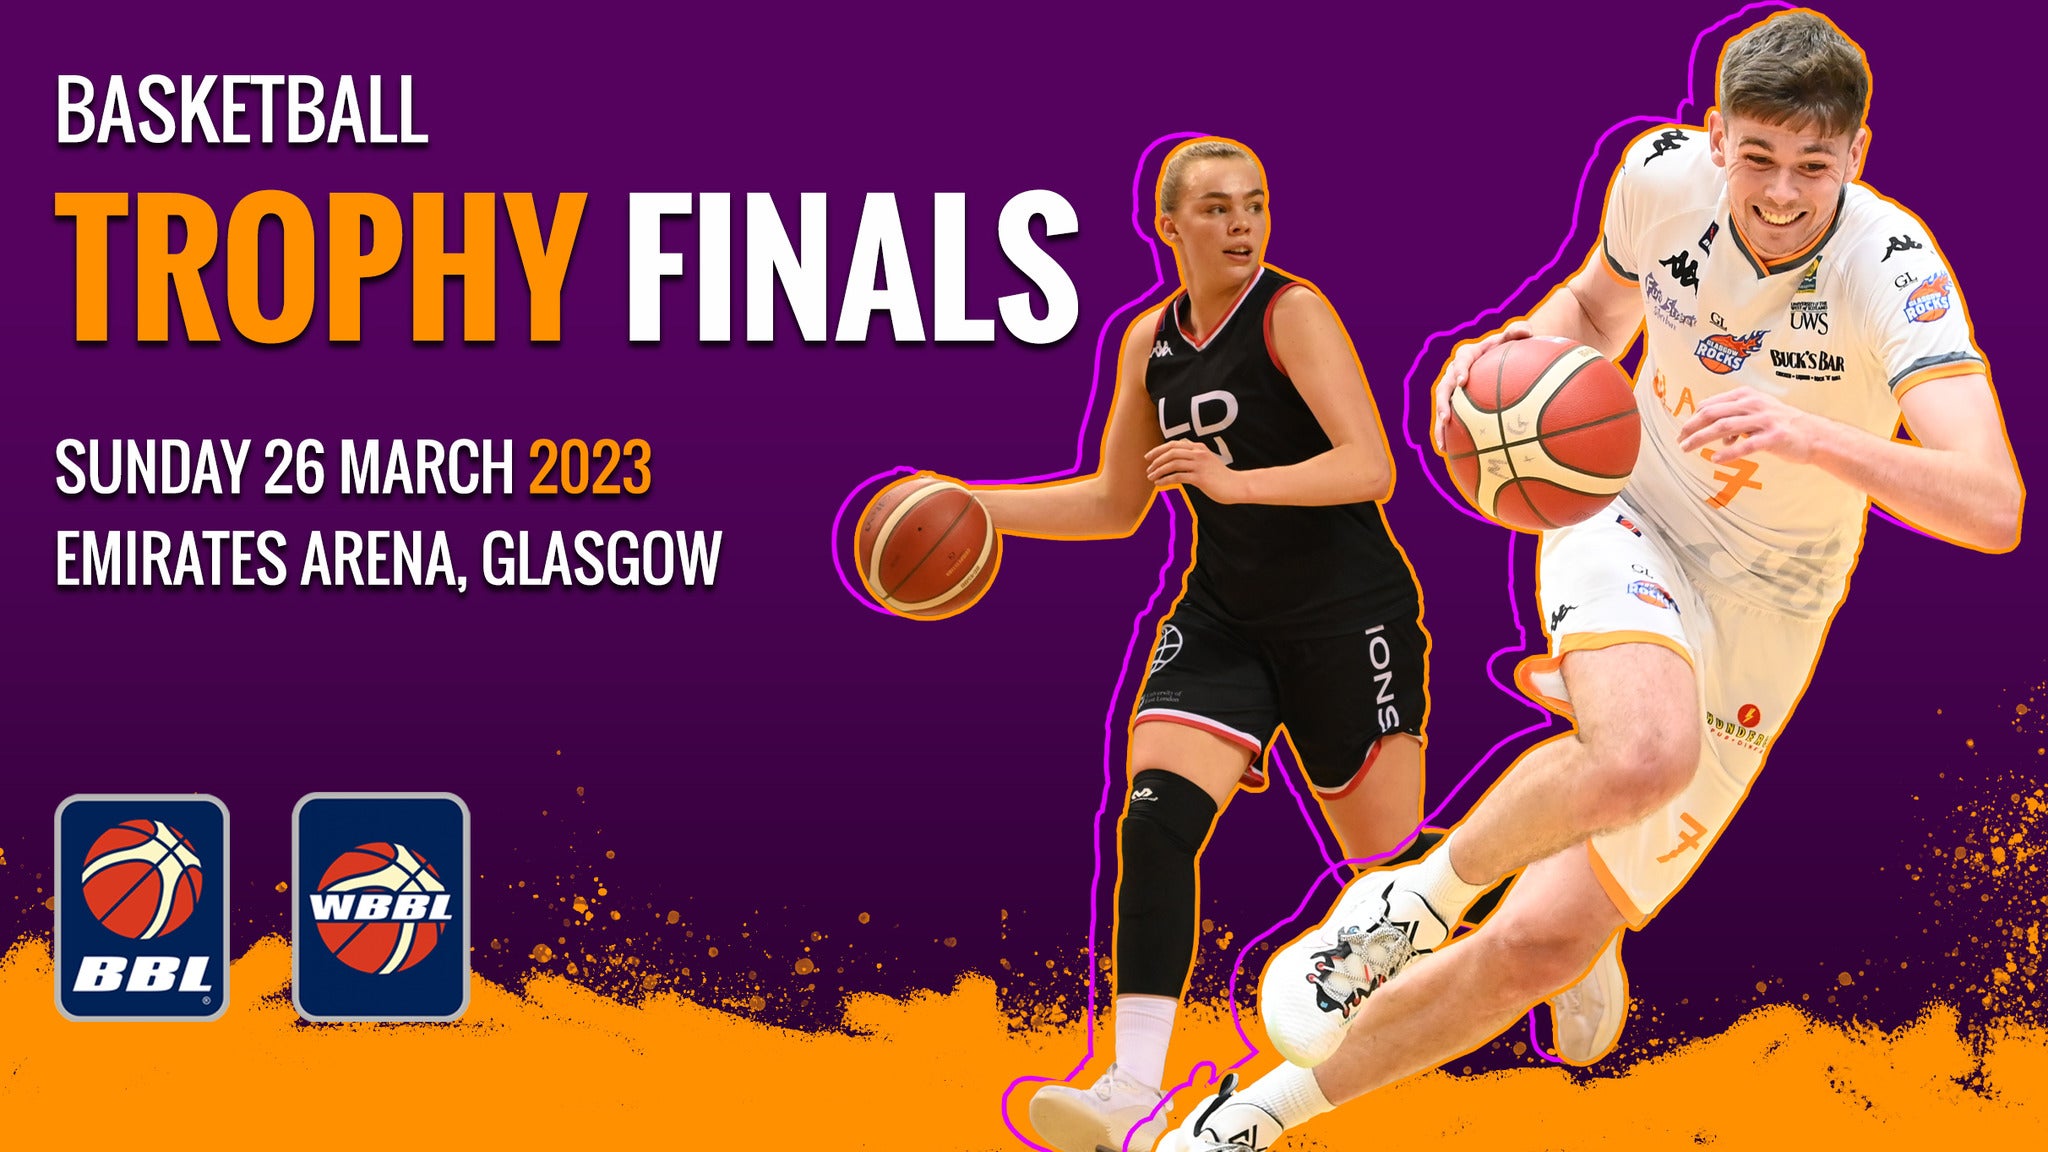 BBL - British Basketball League Playoff Finals 2024 in London promo photo for Ticketmaster presale offer code